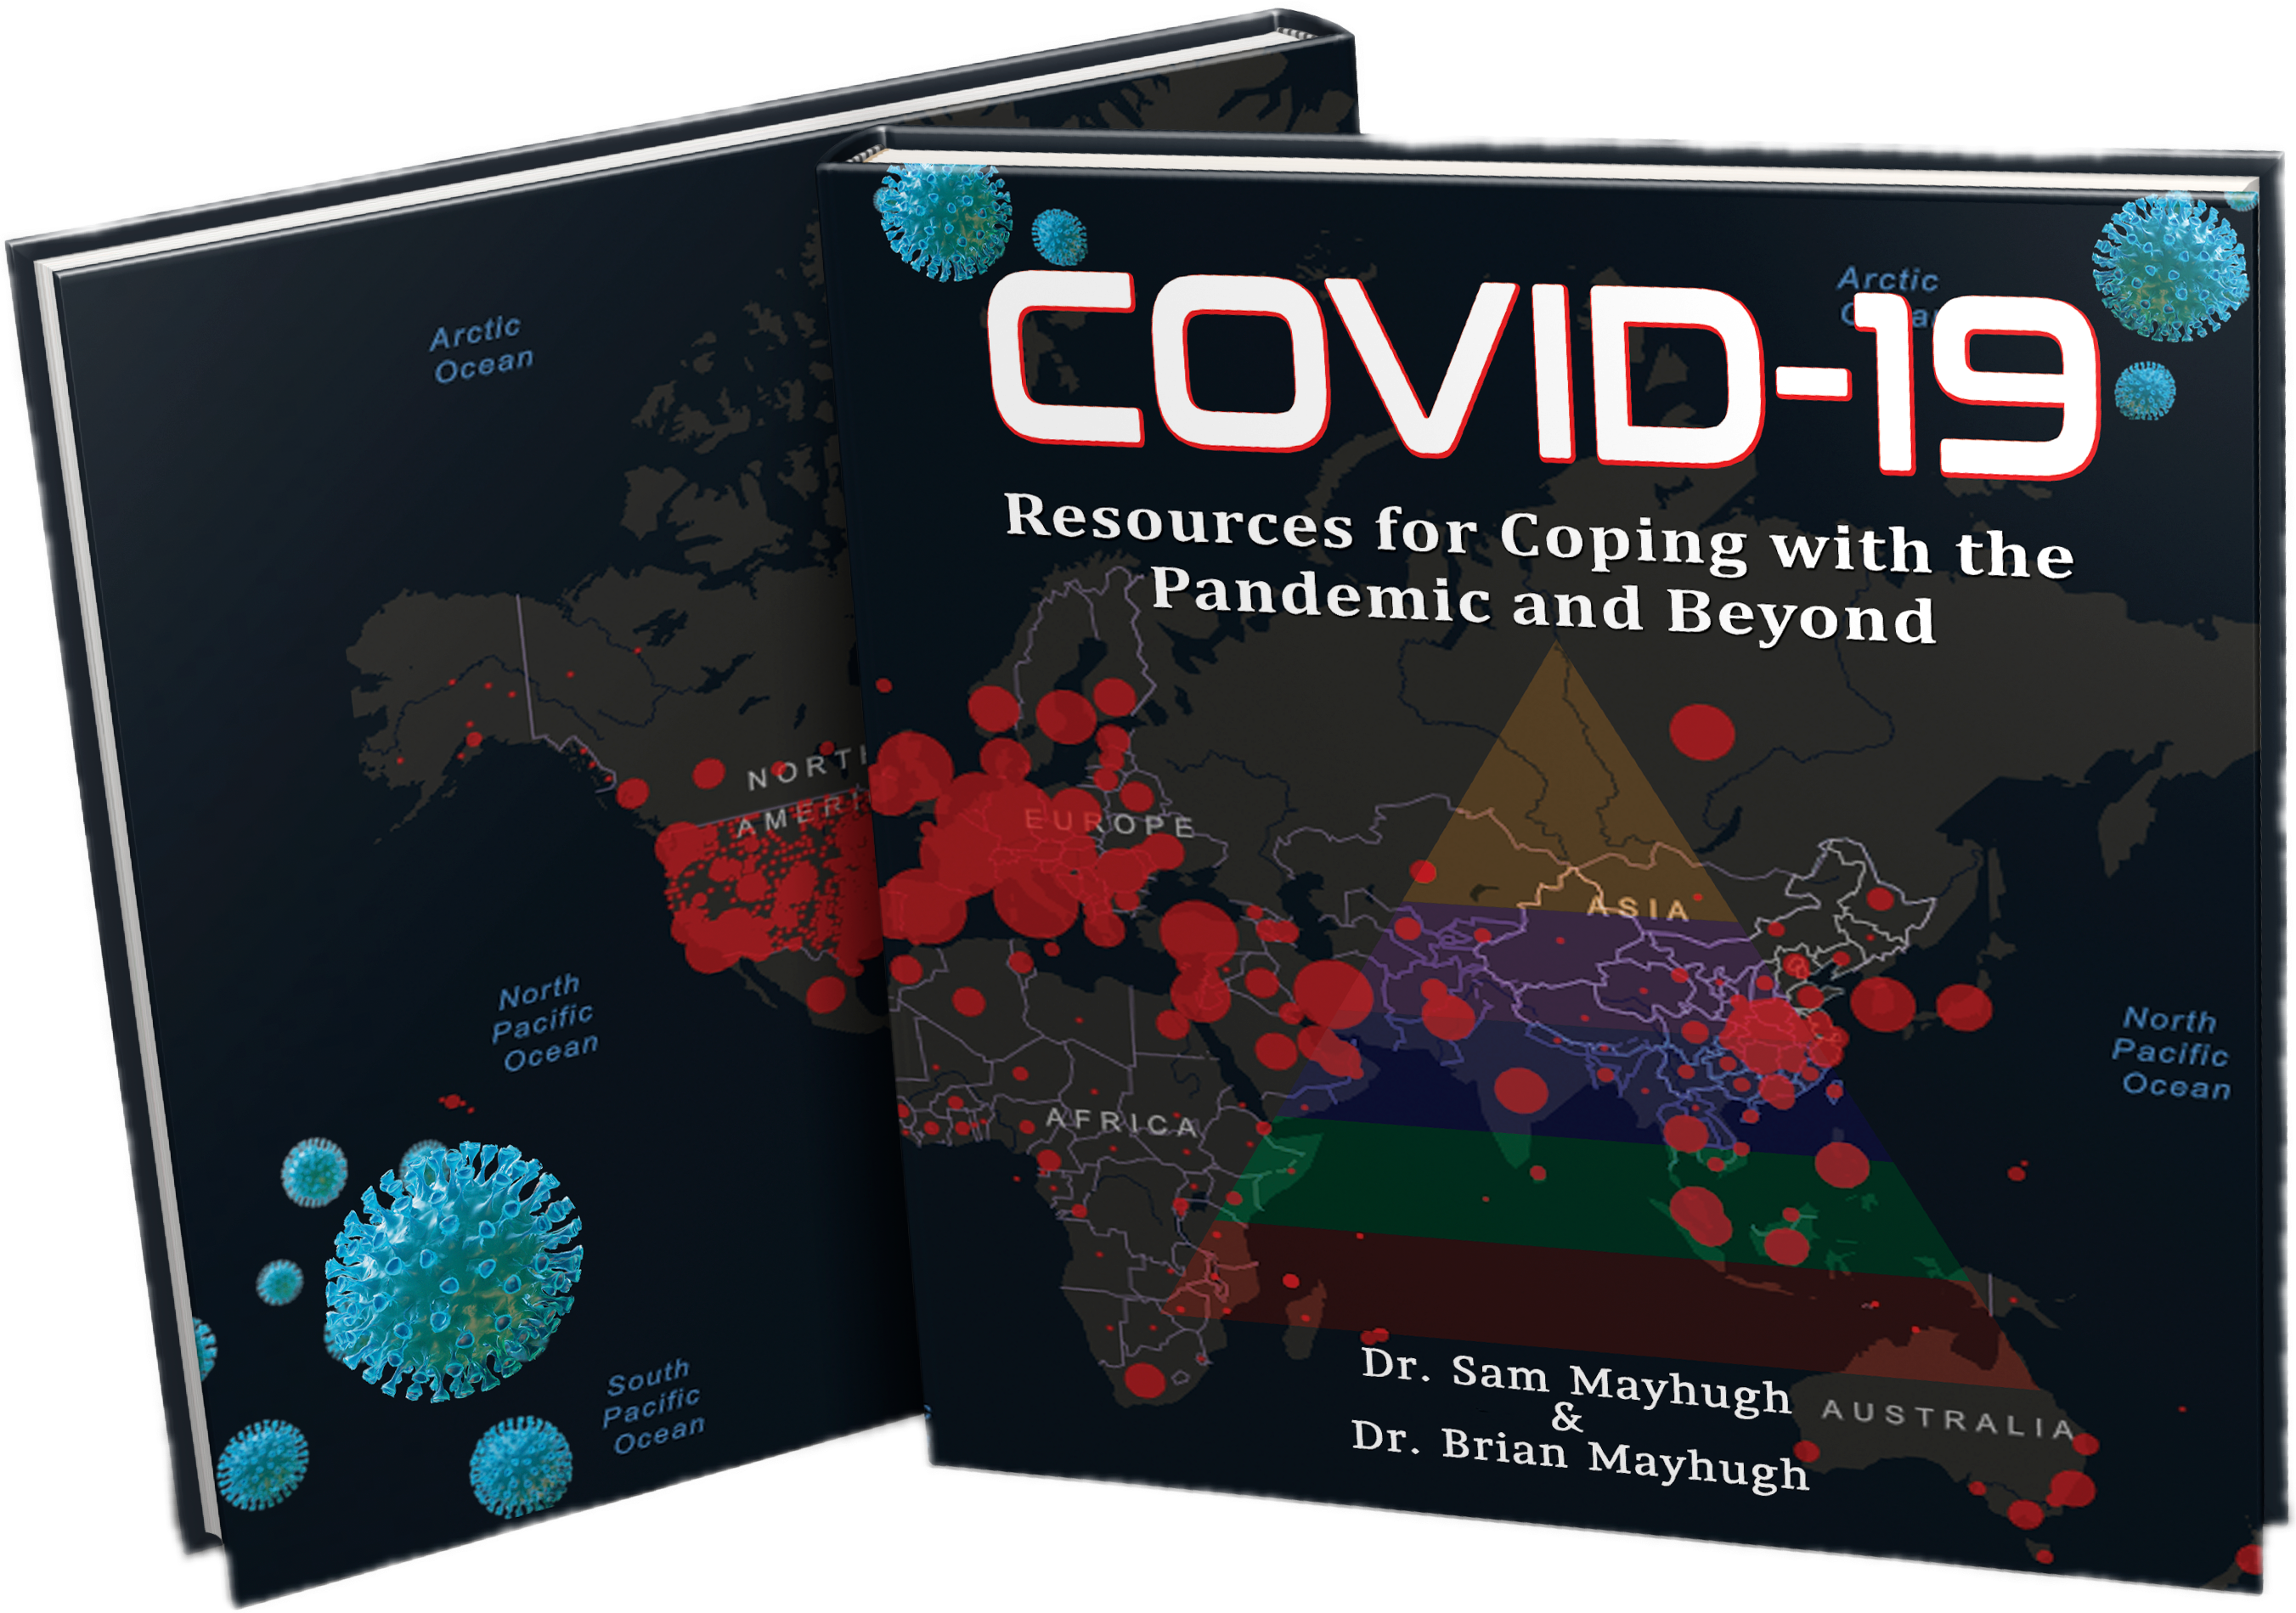 Dr. Sam Mayhugh Announces the Launch of a New Book for People Living Under the Stress of the COVID-19